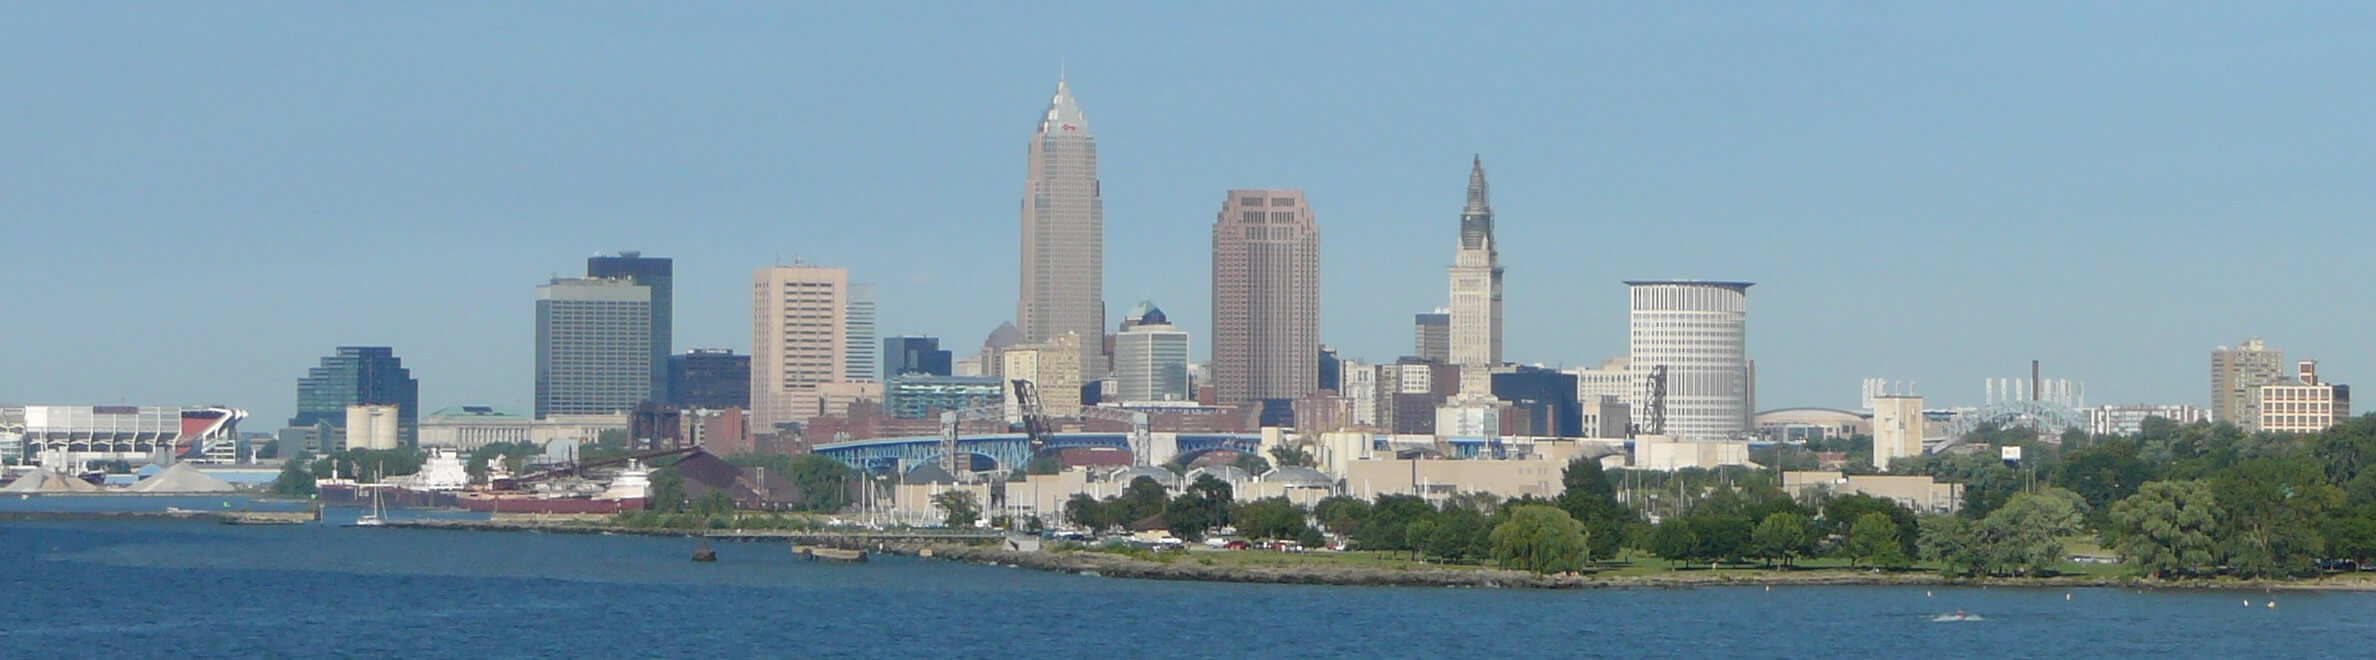 Skyline of Cleveland from Lake Erie